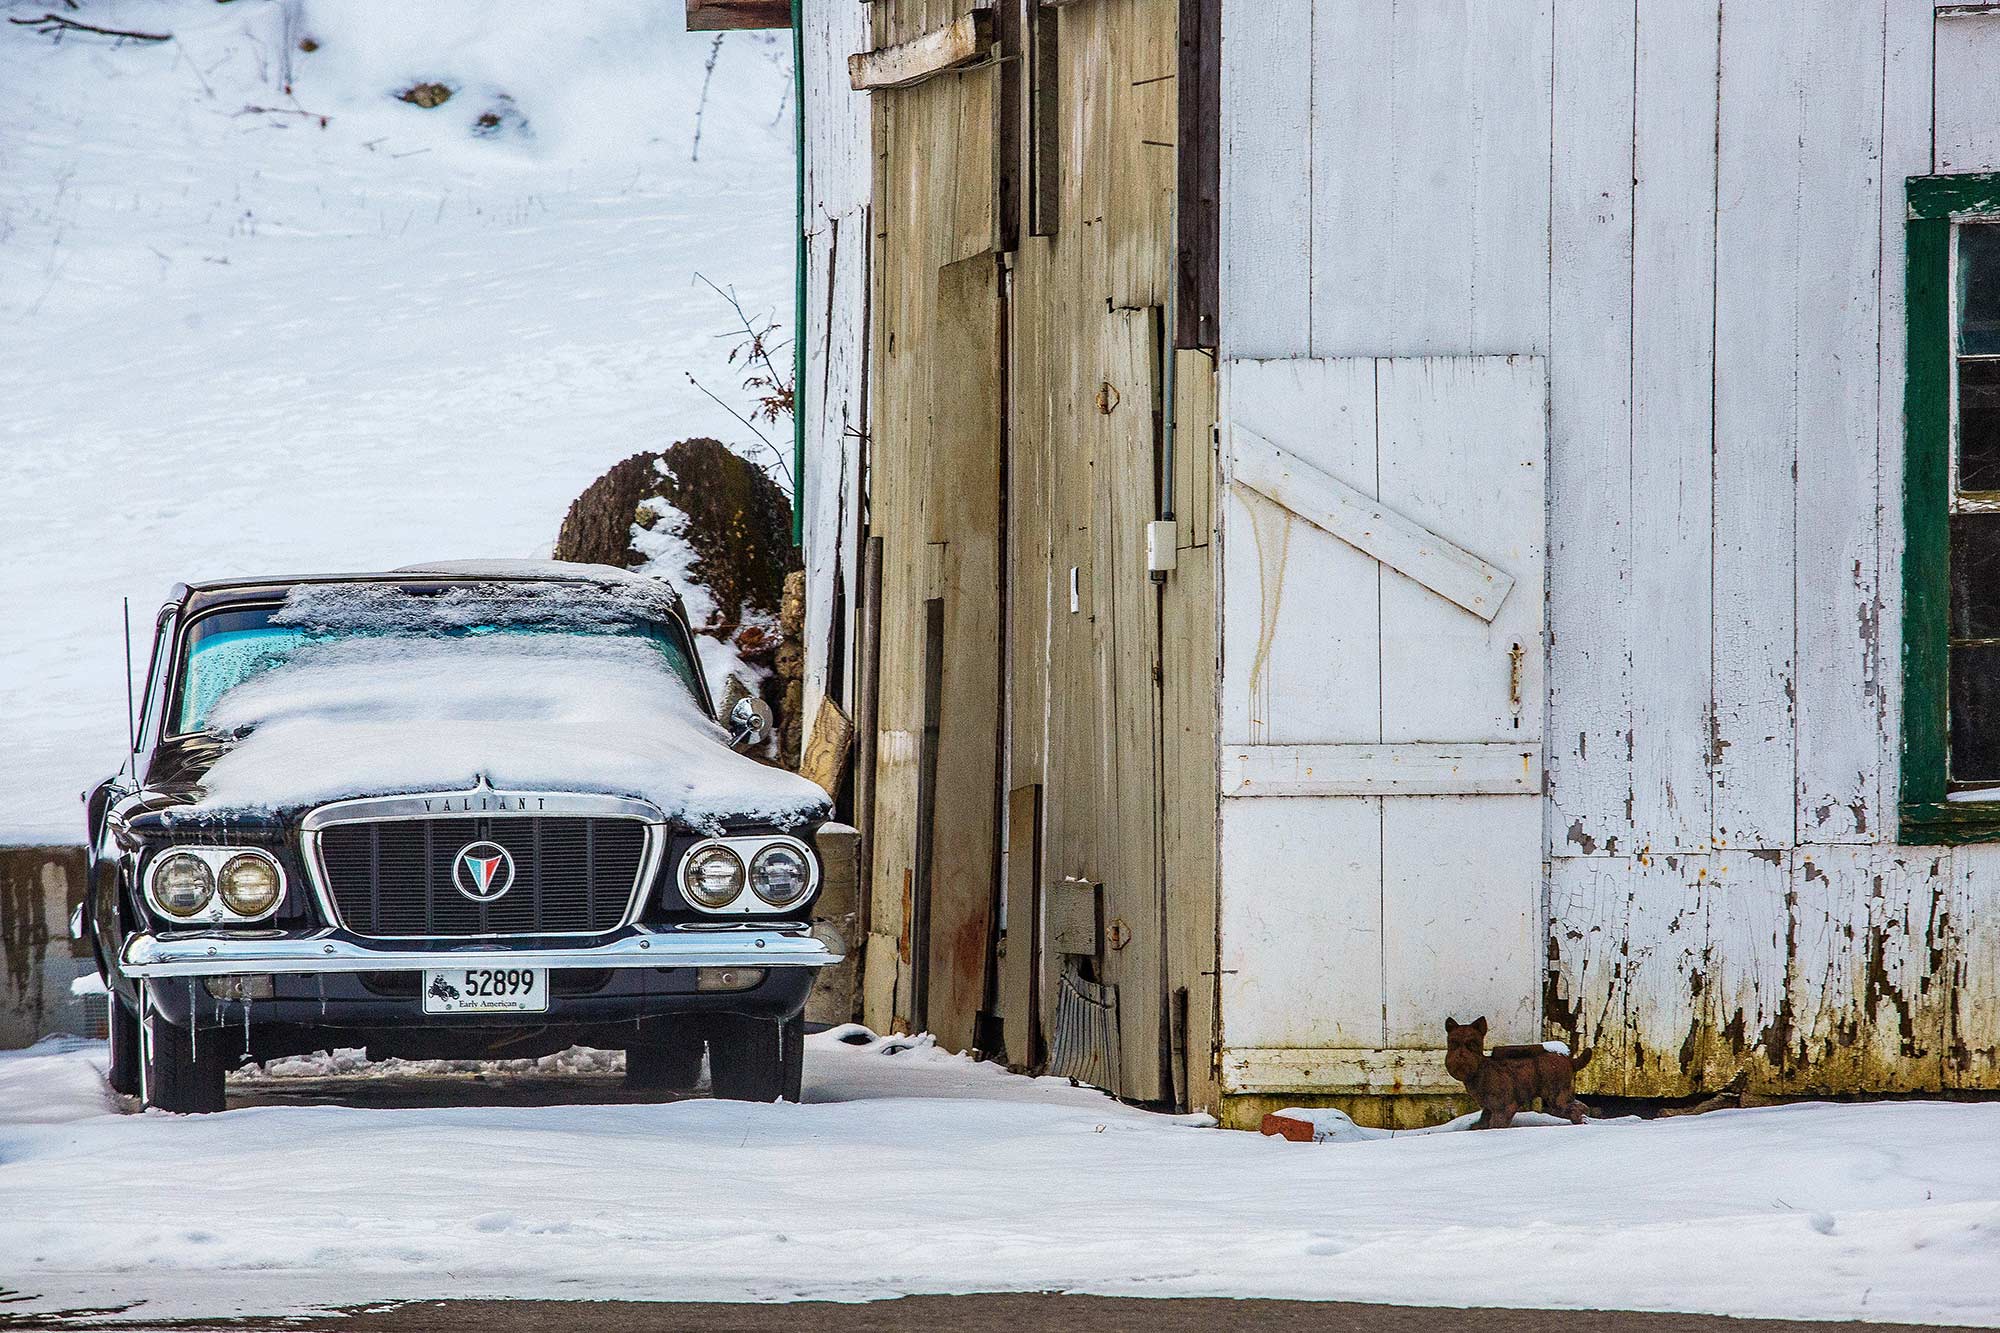 Plymouth Valiant, Barkhamsted, CT, 1/14/15